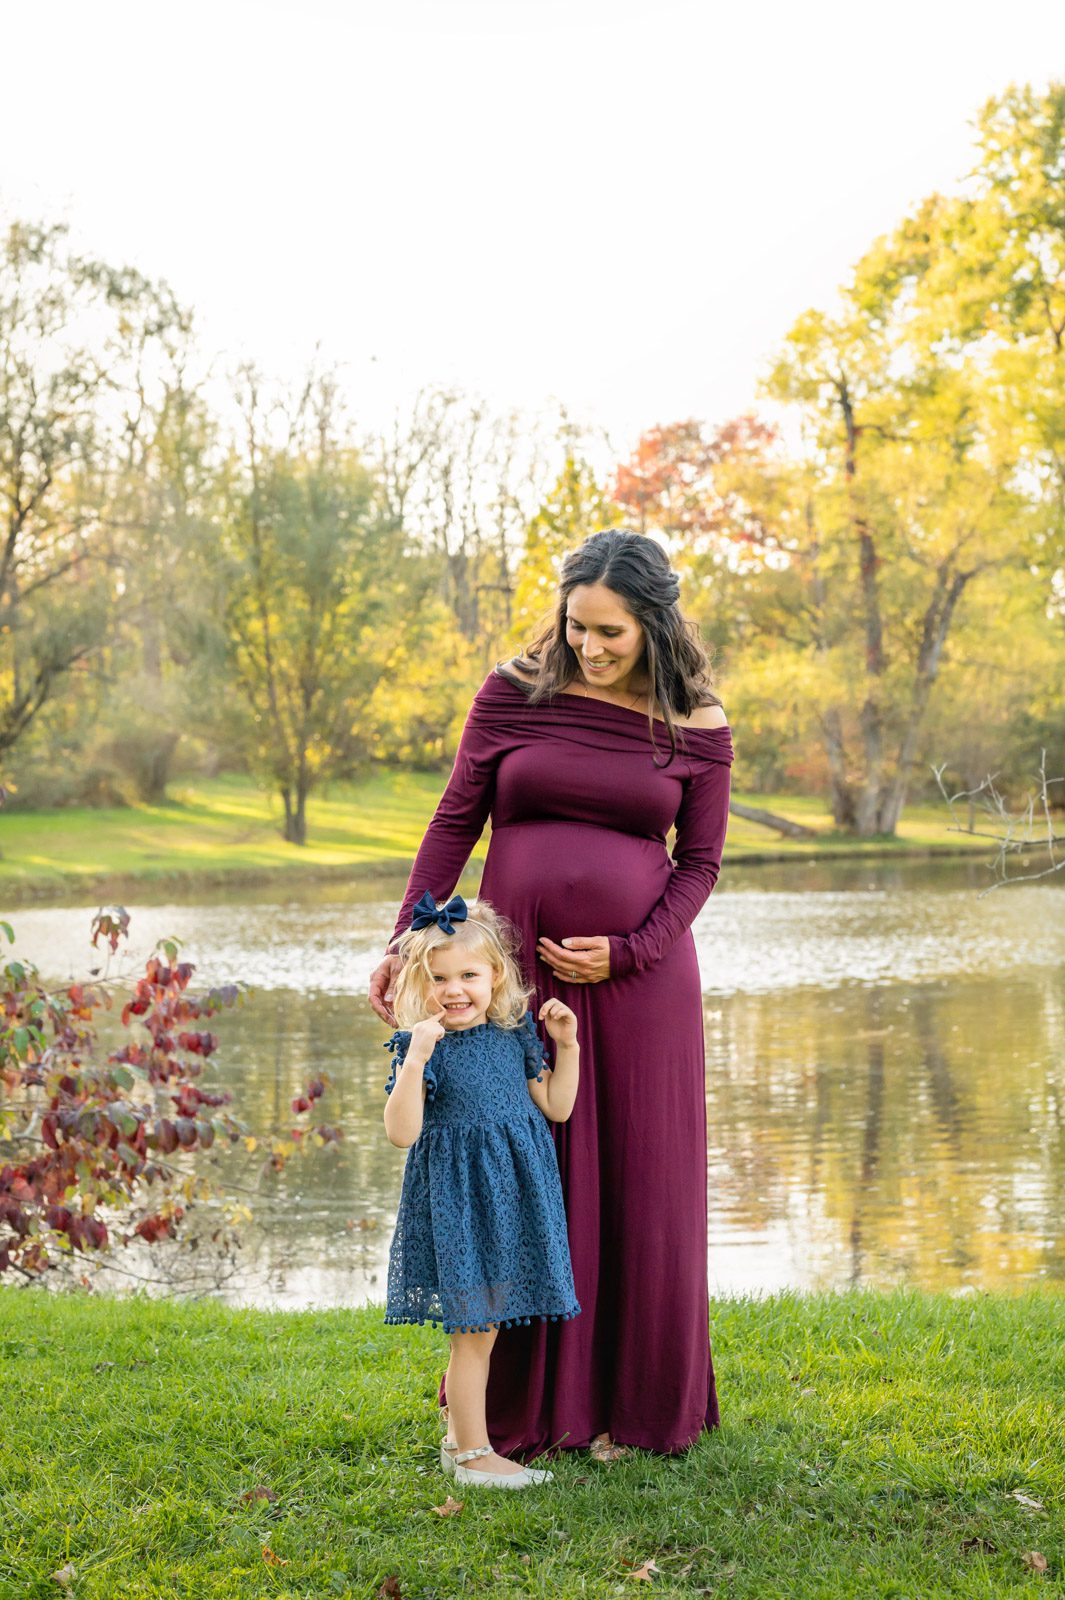 an expecting mom cradling her belly and smiling down at her young daughter while she makes a silly face at the camera during a maternity photoshoot